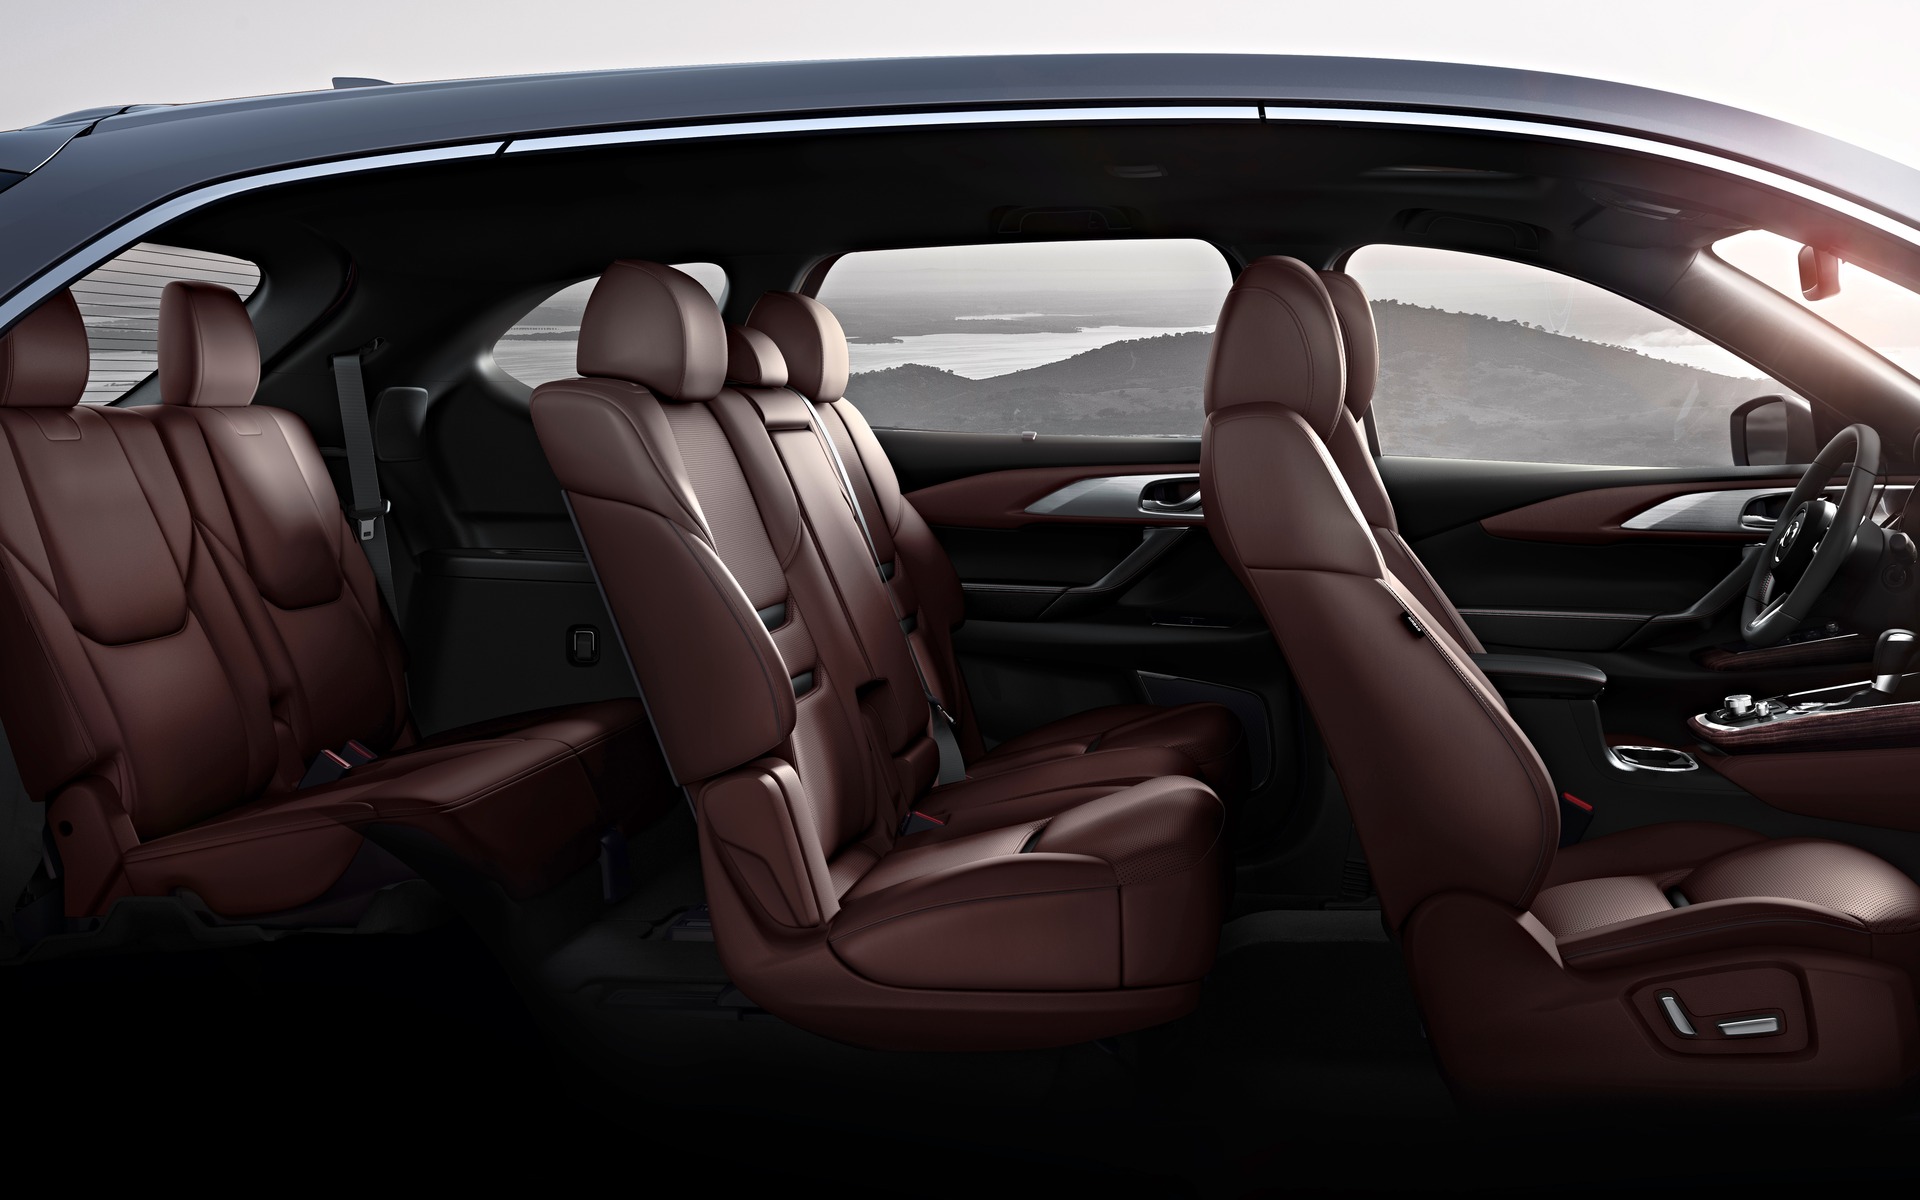 The 2016 Mazda CX-9 still offers three rows of seats.